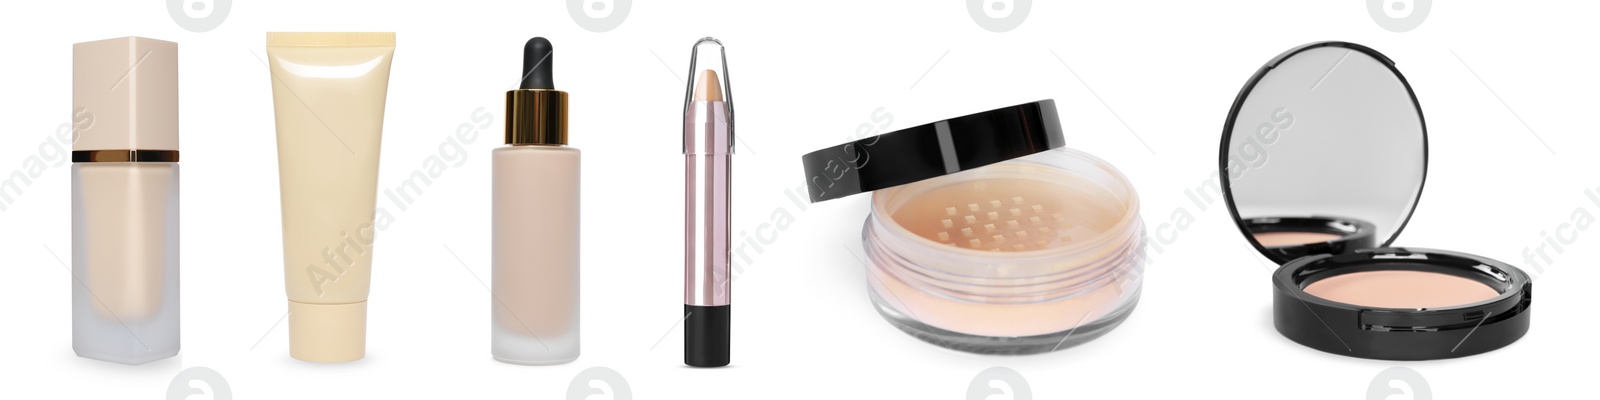 Image of Face powders, corrector and liquid foundations isolated on white. Collection of makeup products